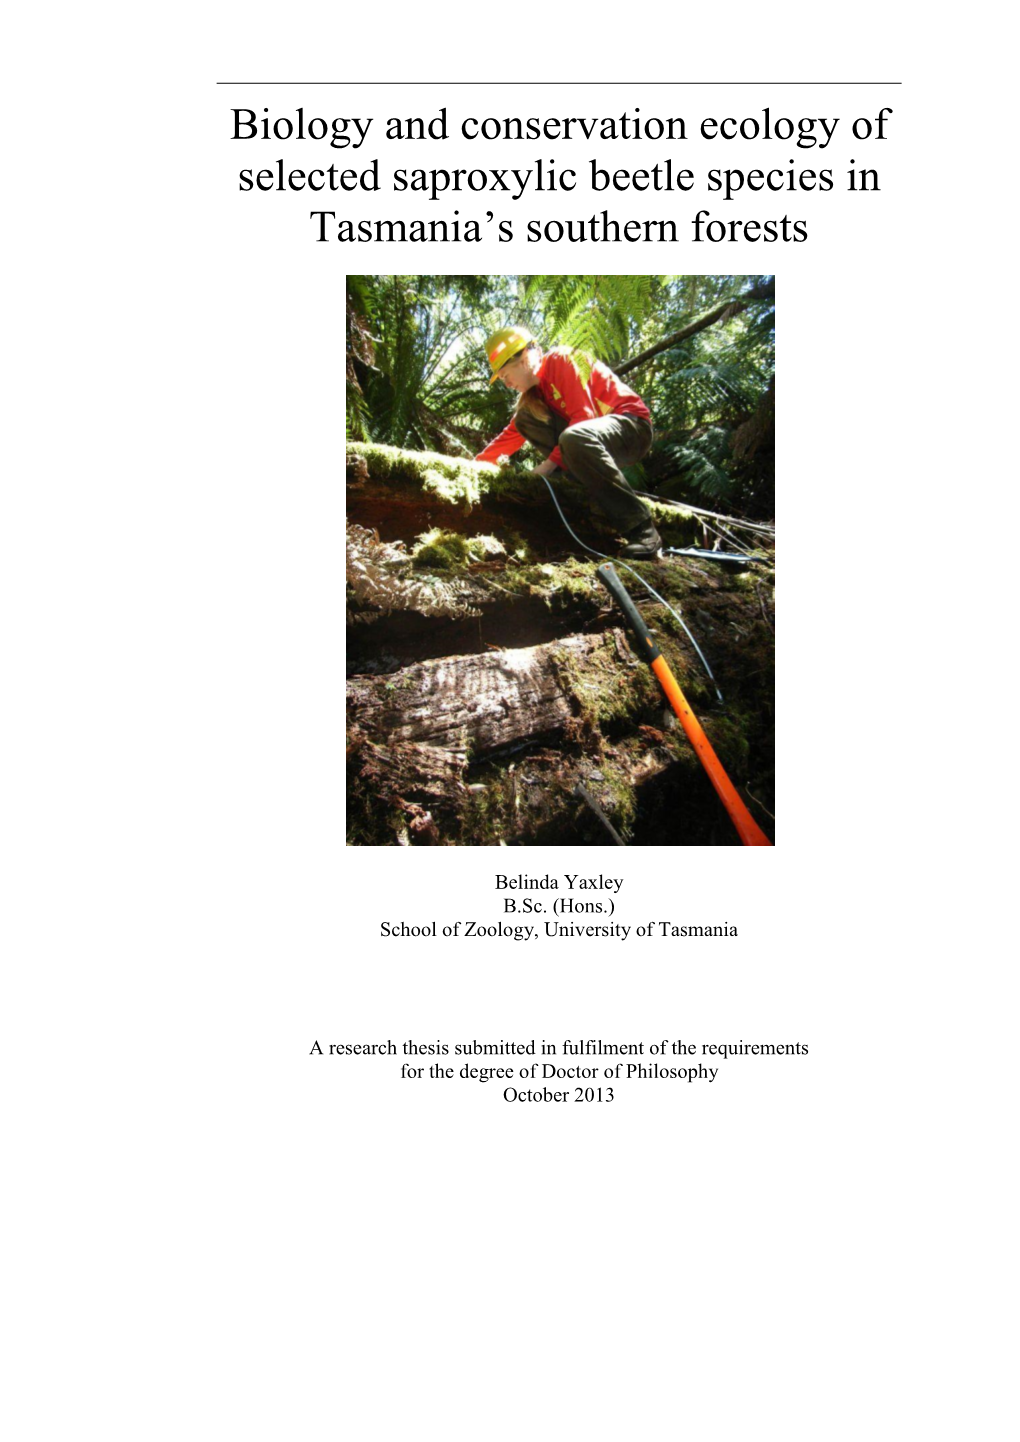 Biology and Conservation Ecology of Selected Saproxylic Beetle Species in Tasmania‘S Southern Forests